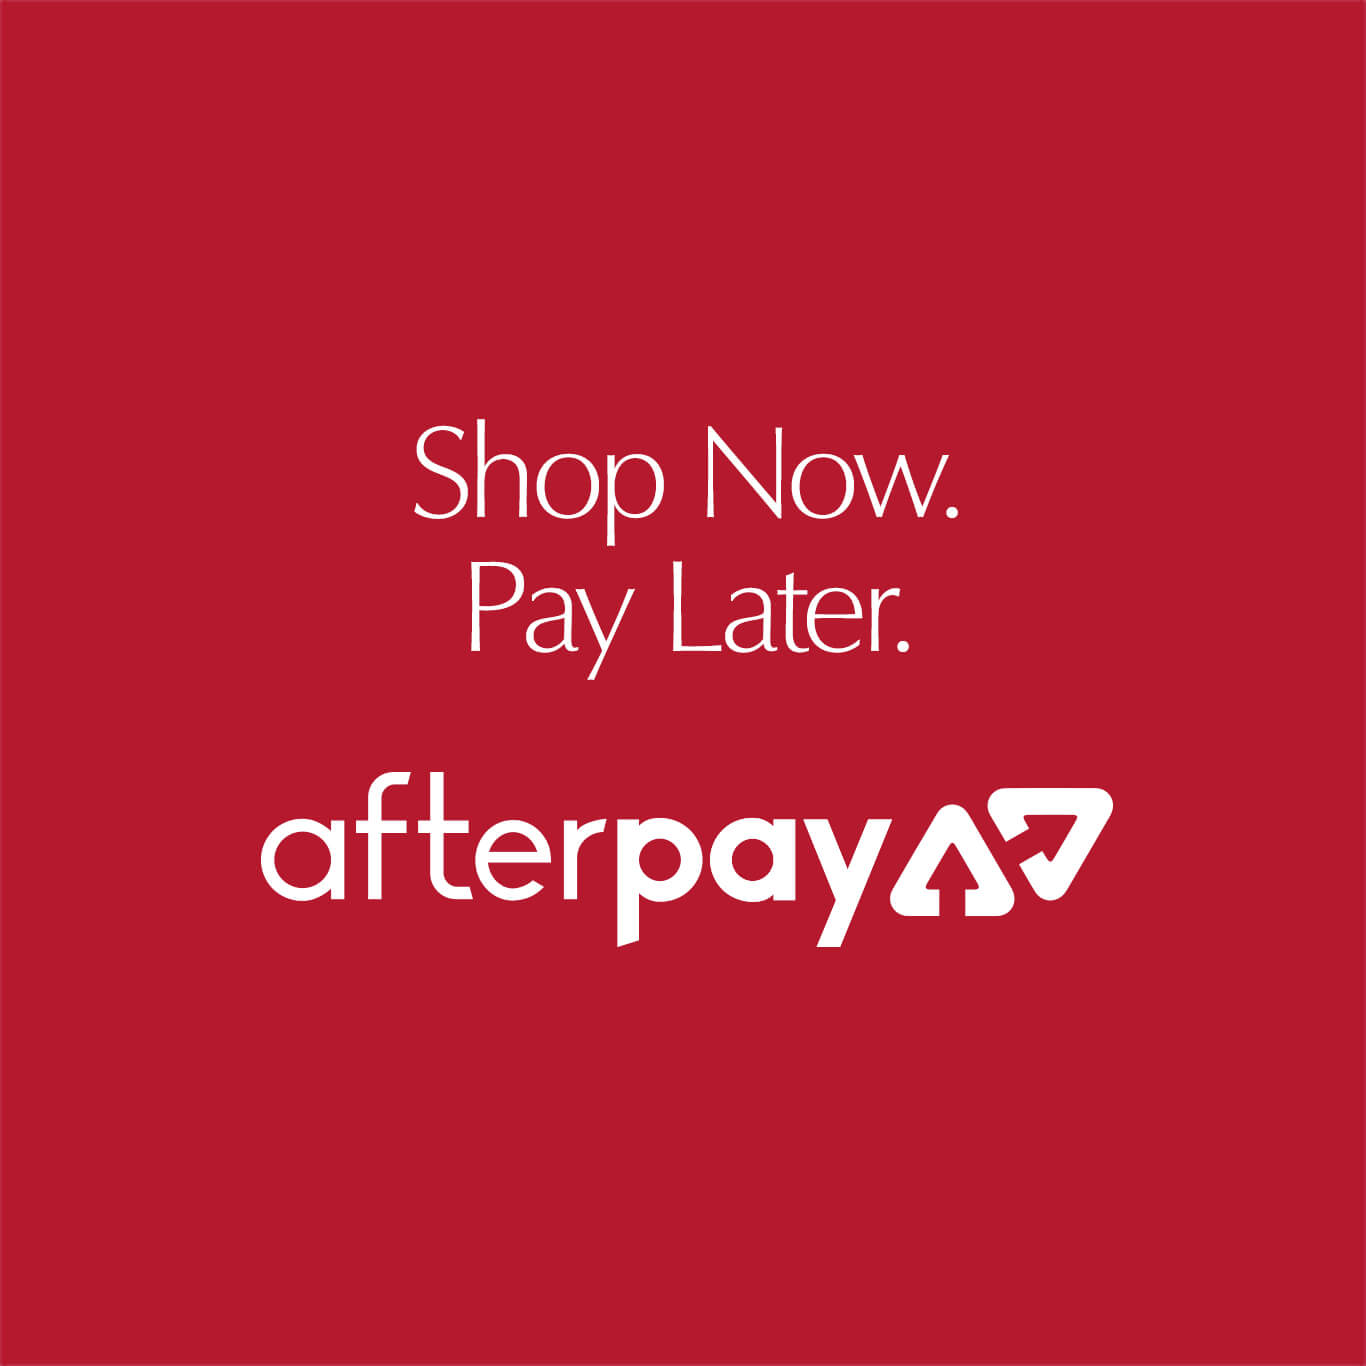 Afterpay - Beauty now, pay later in 4 installments.